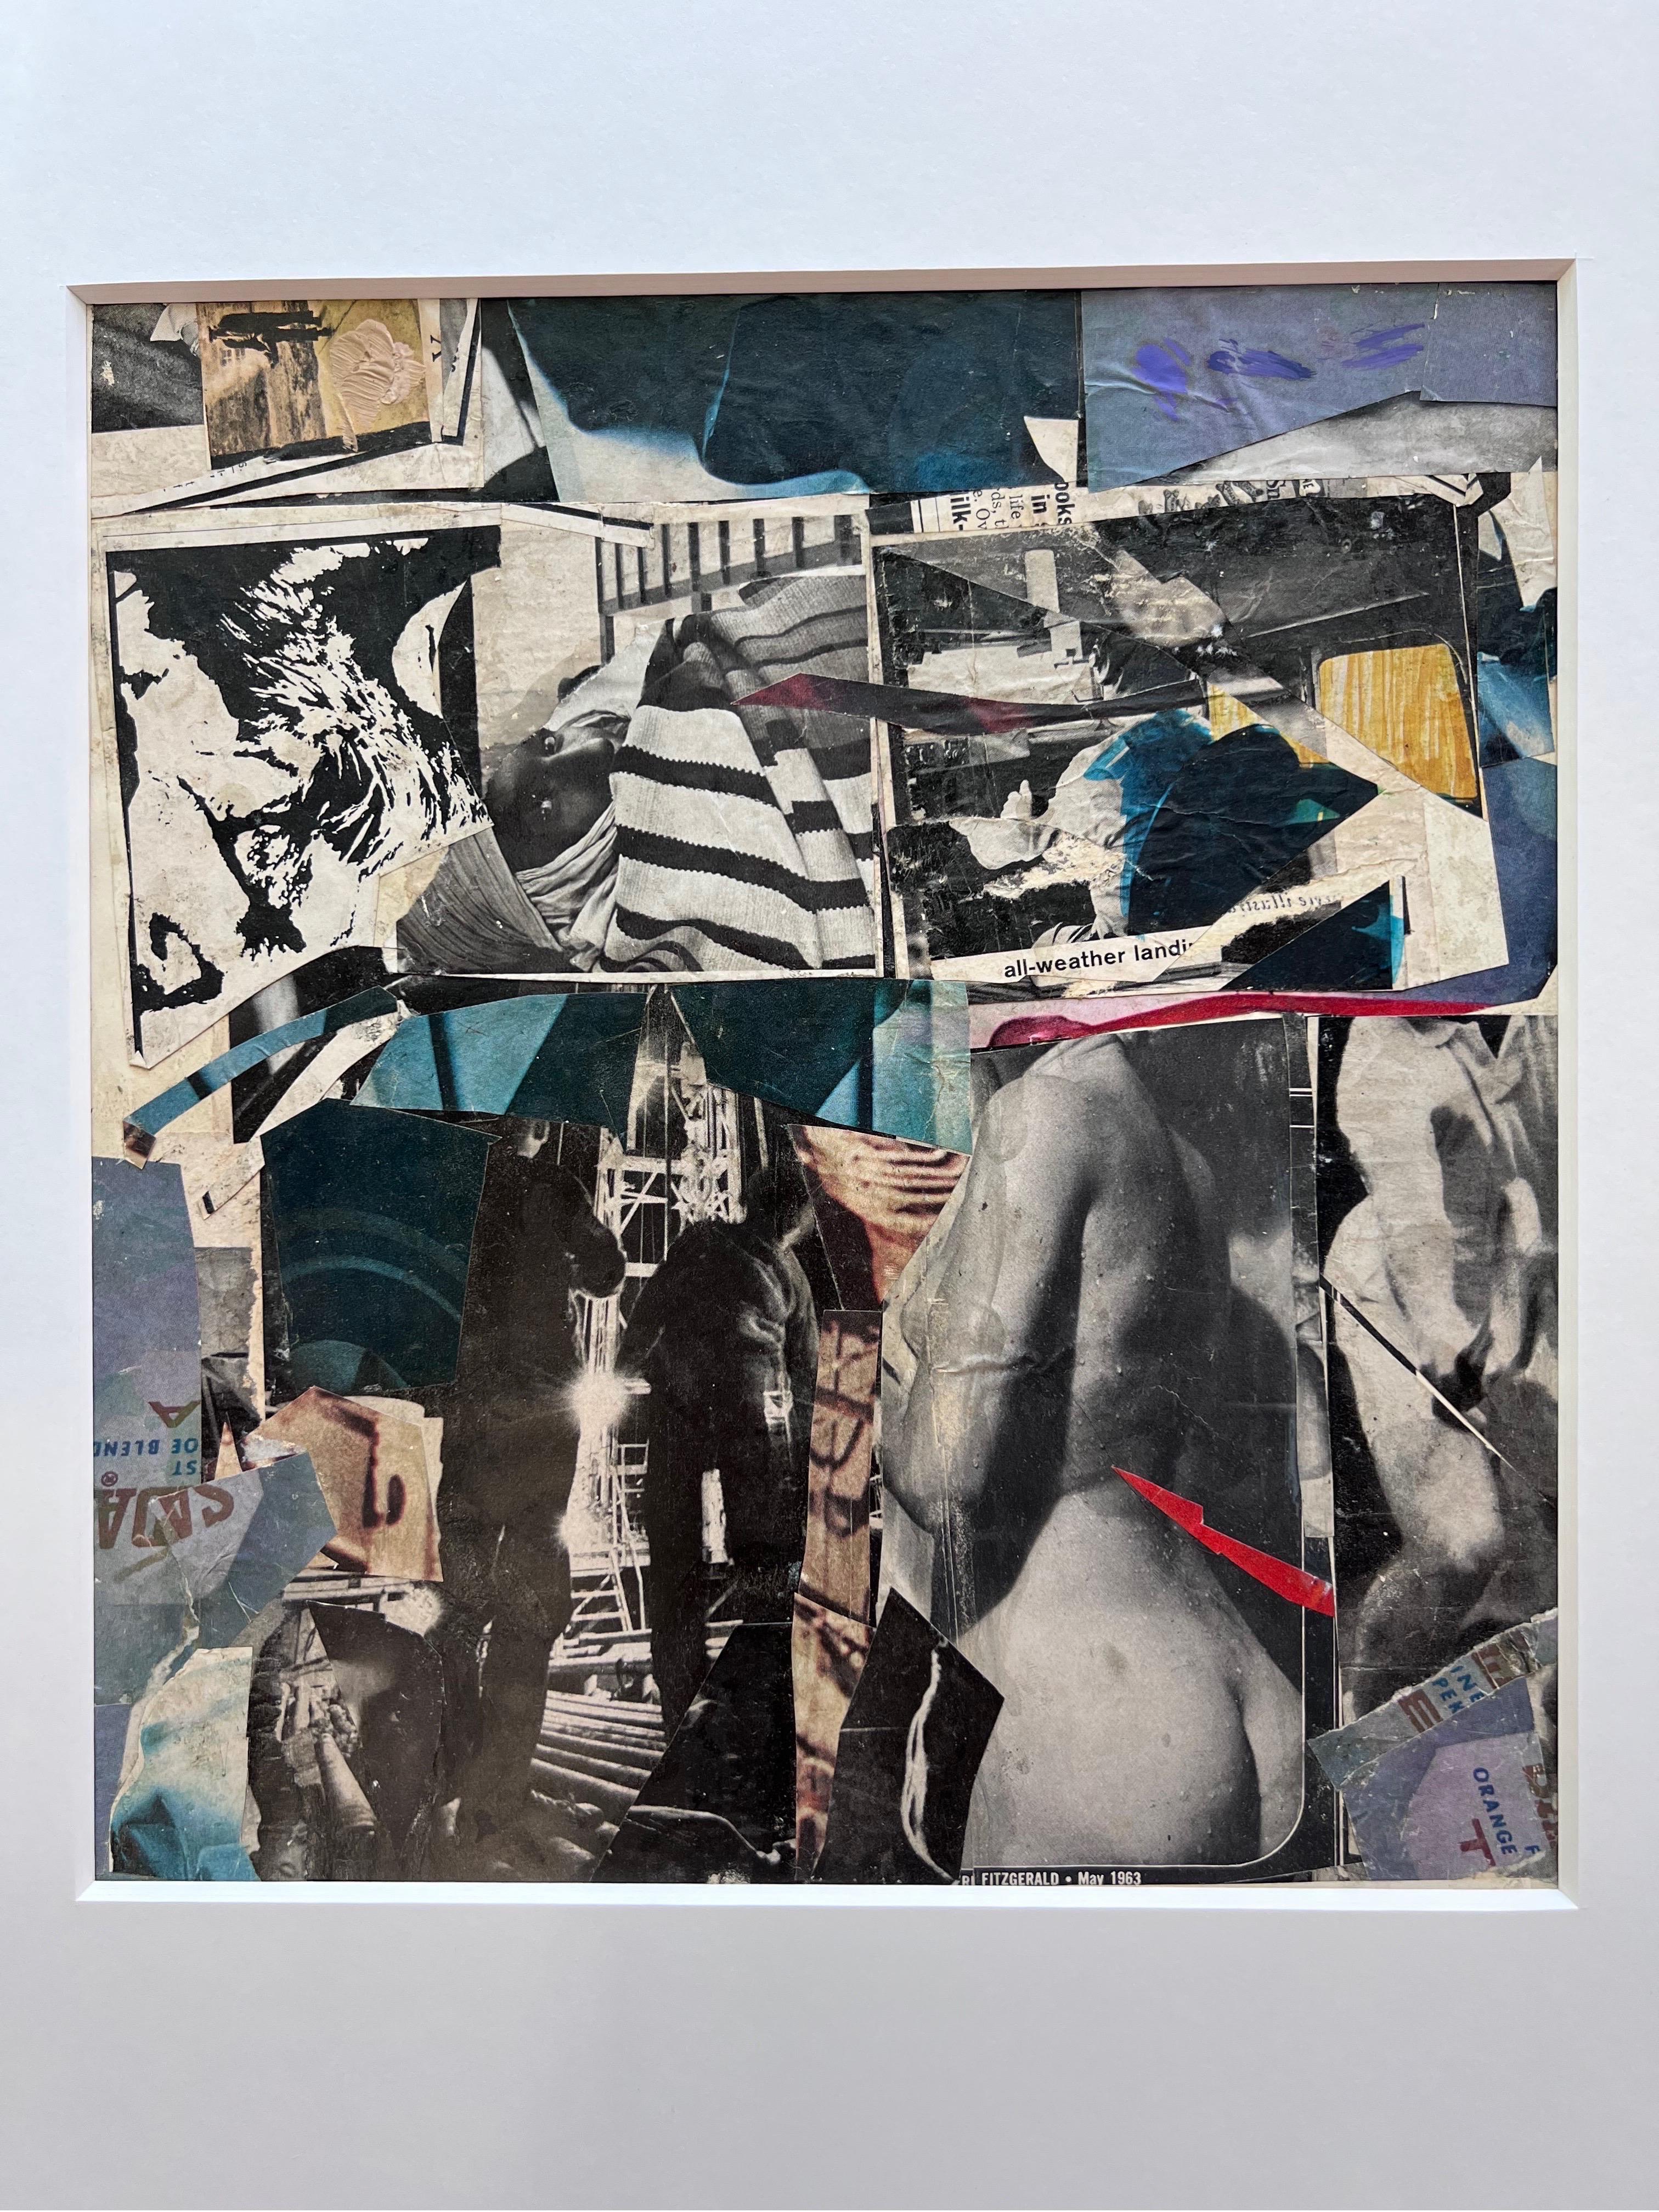 Paper and Adhesive collage by Wayne Timm. Image and mat opening measures 11 3/4 x 12 3/4 in. 

In the 1960's, Wayne Timm rubbed elbows with the likes of Warhol, Lichtenstein, Rauchenburg and many others, in the time he had an Art studio loft in New